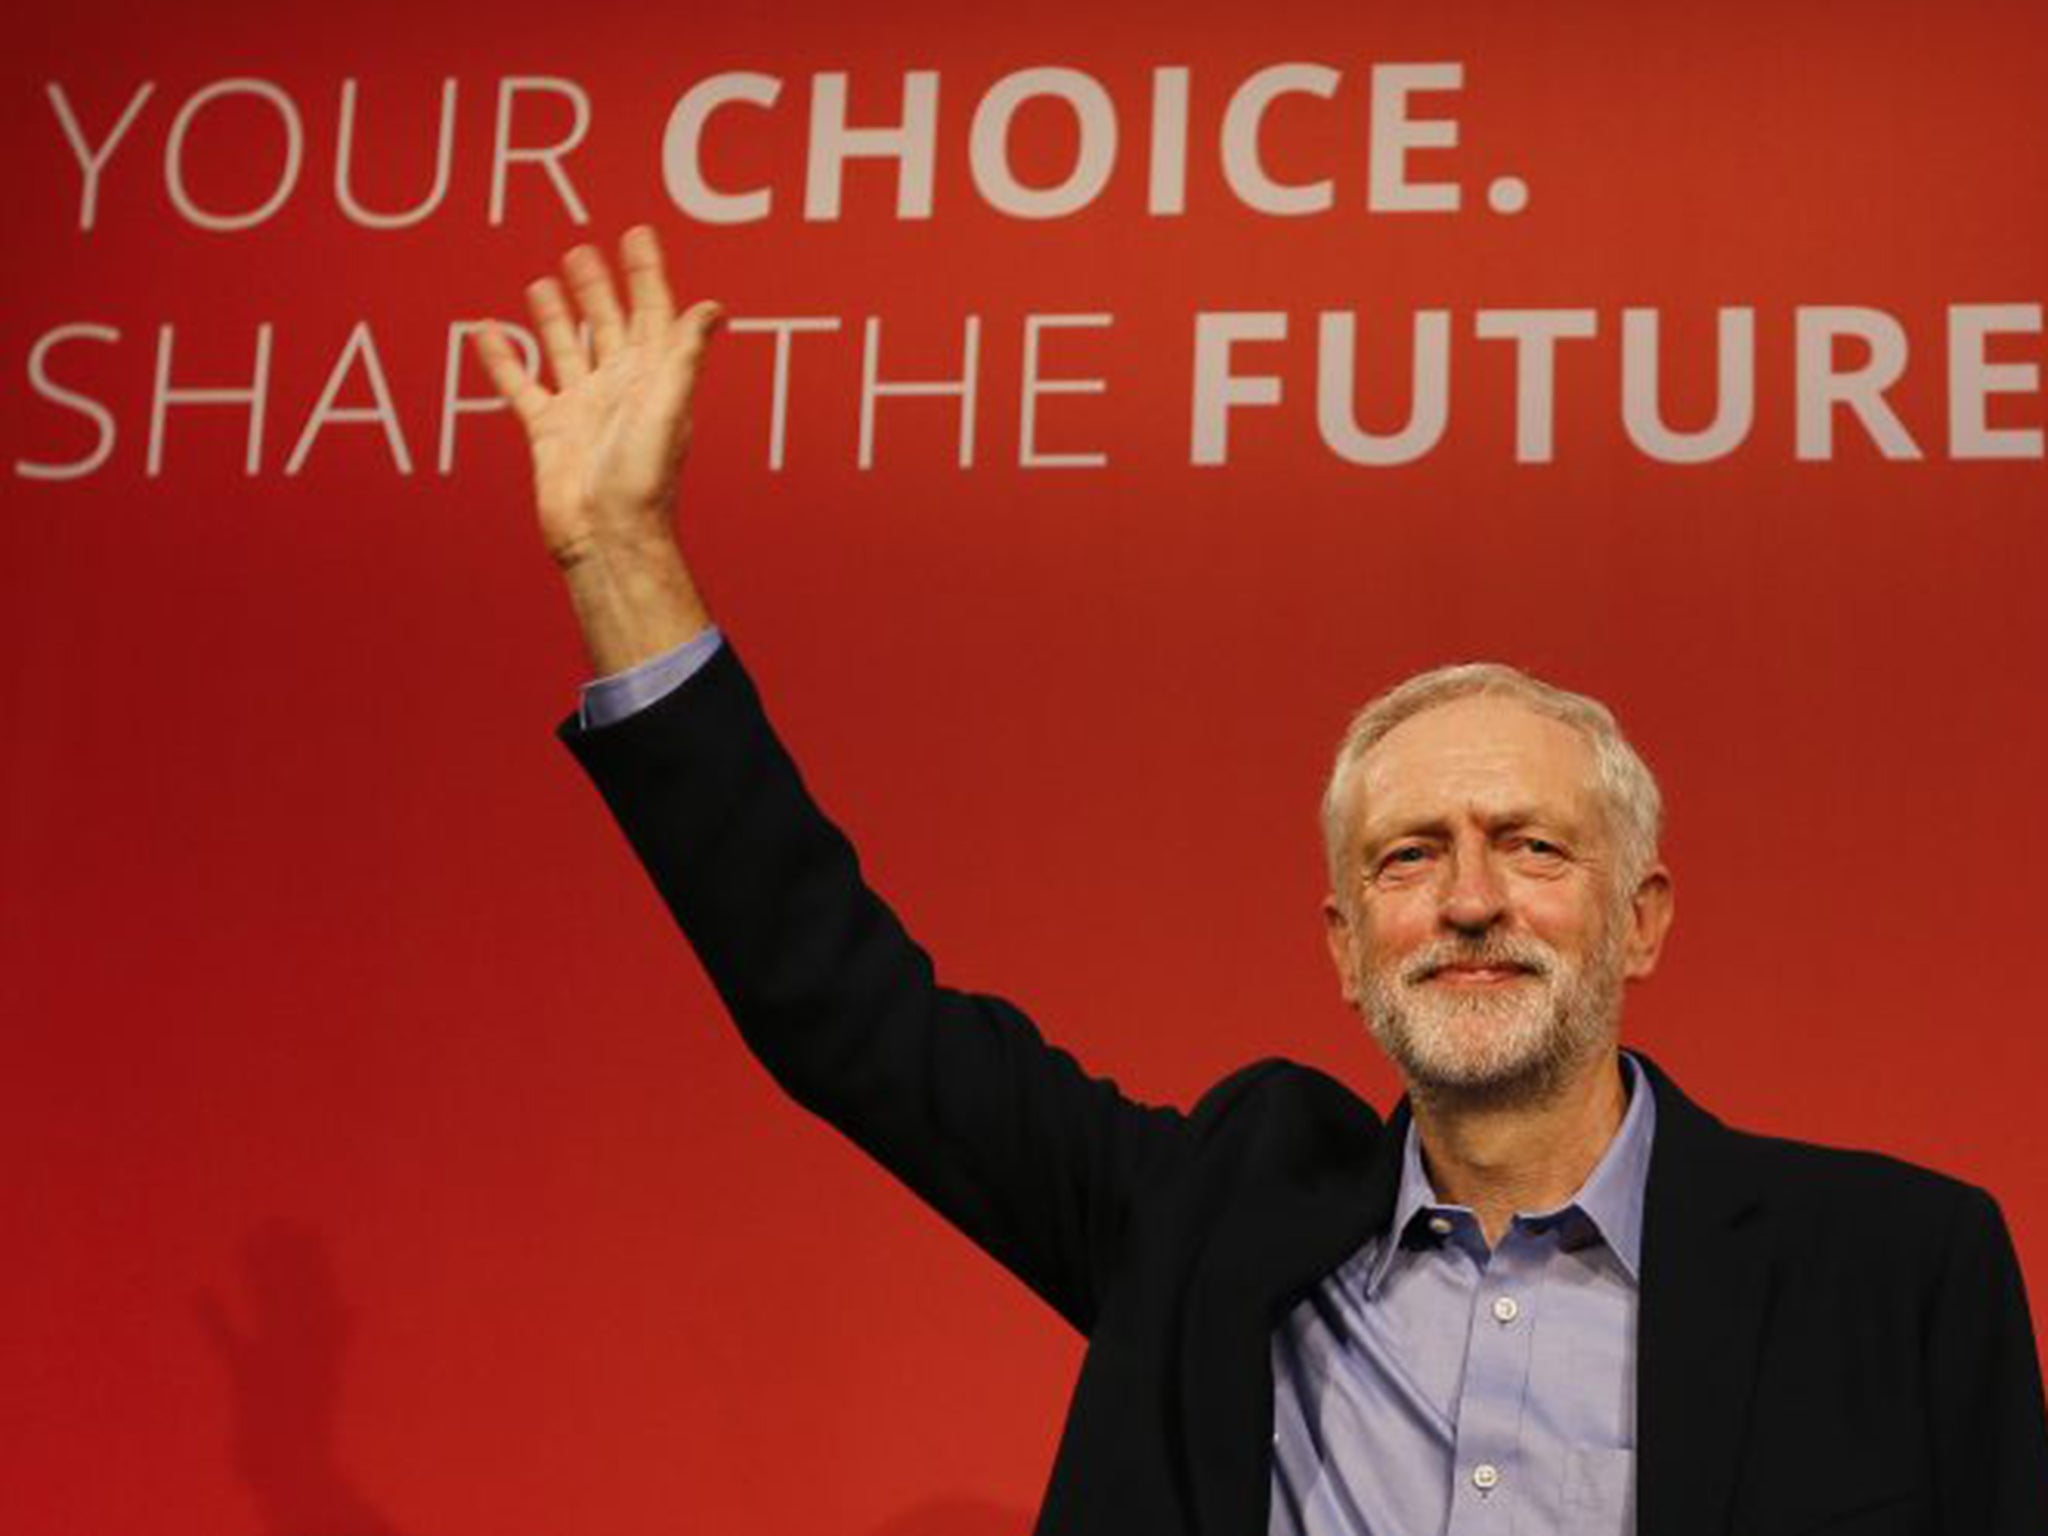 Jeremy Corbyn won the leadership contest in the first round, with a 59% share of the vote